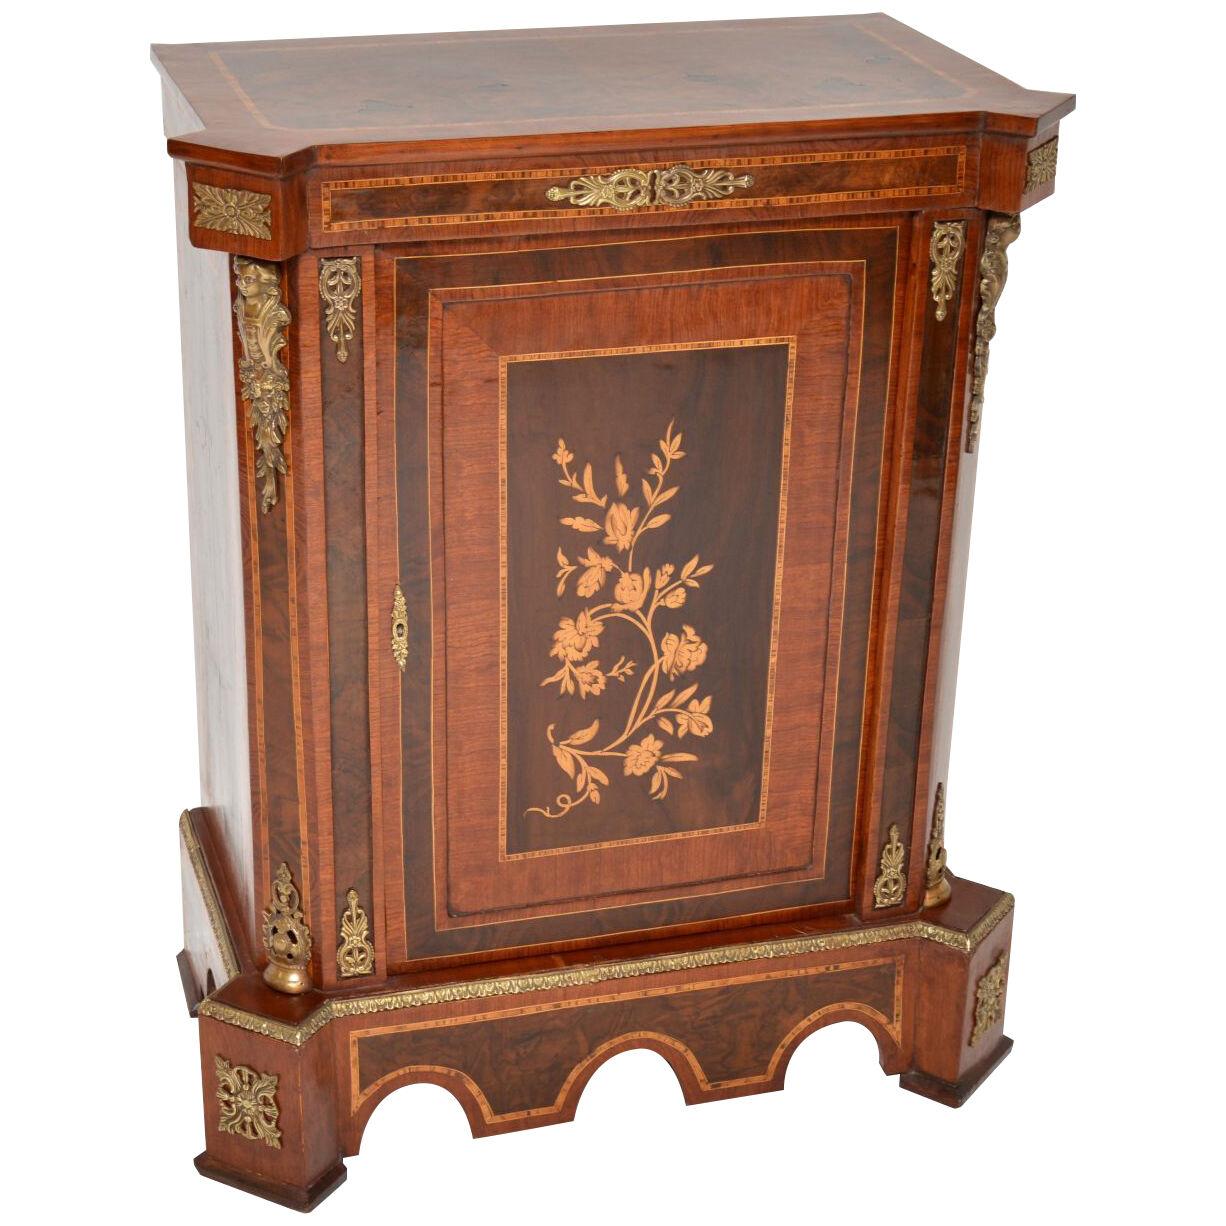 Antique French Inlaid Marquetry Cabinet